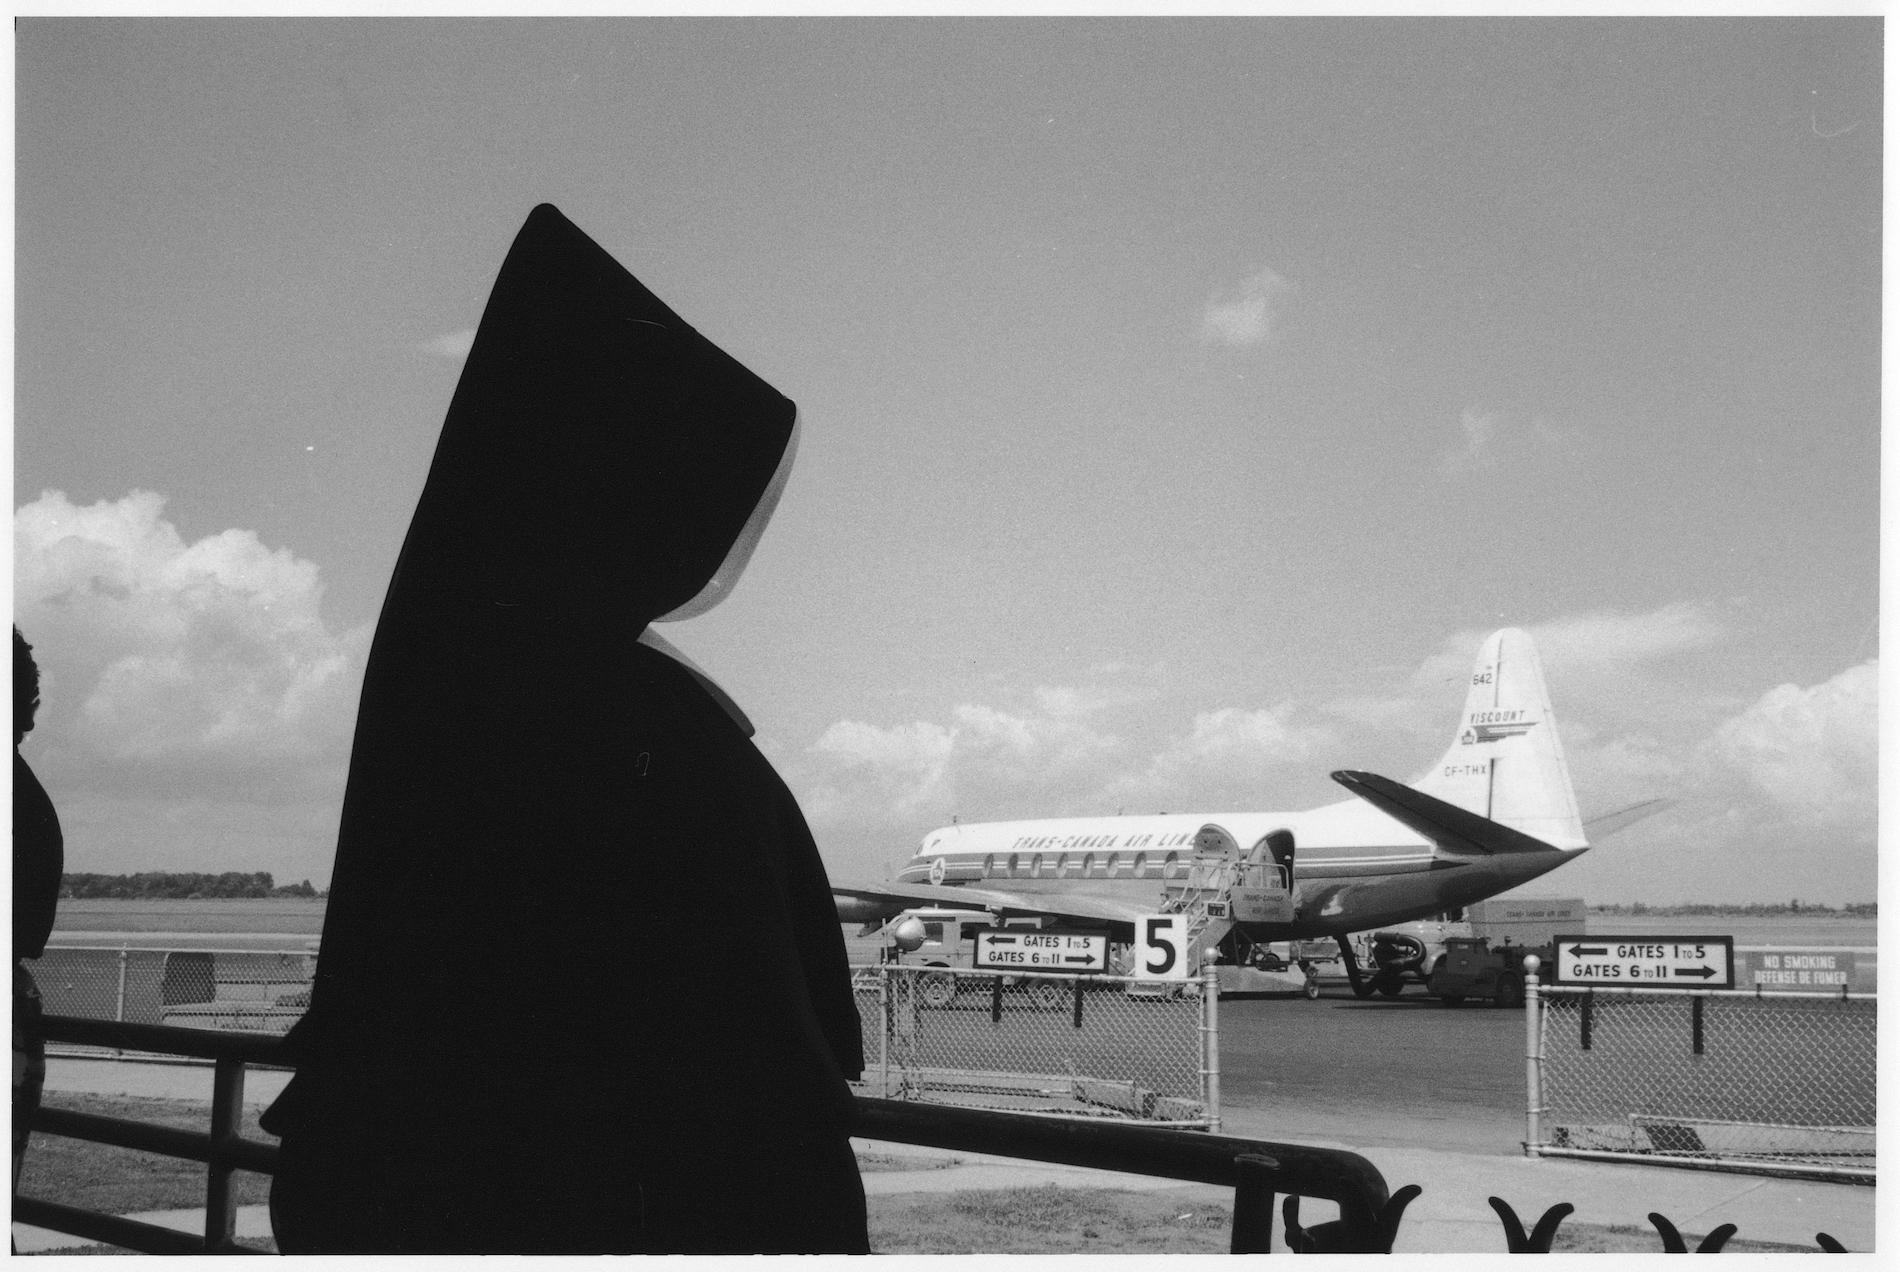 A nun dressed in black looks at an airplane on the runway